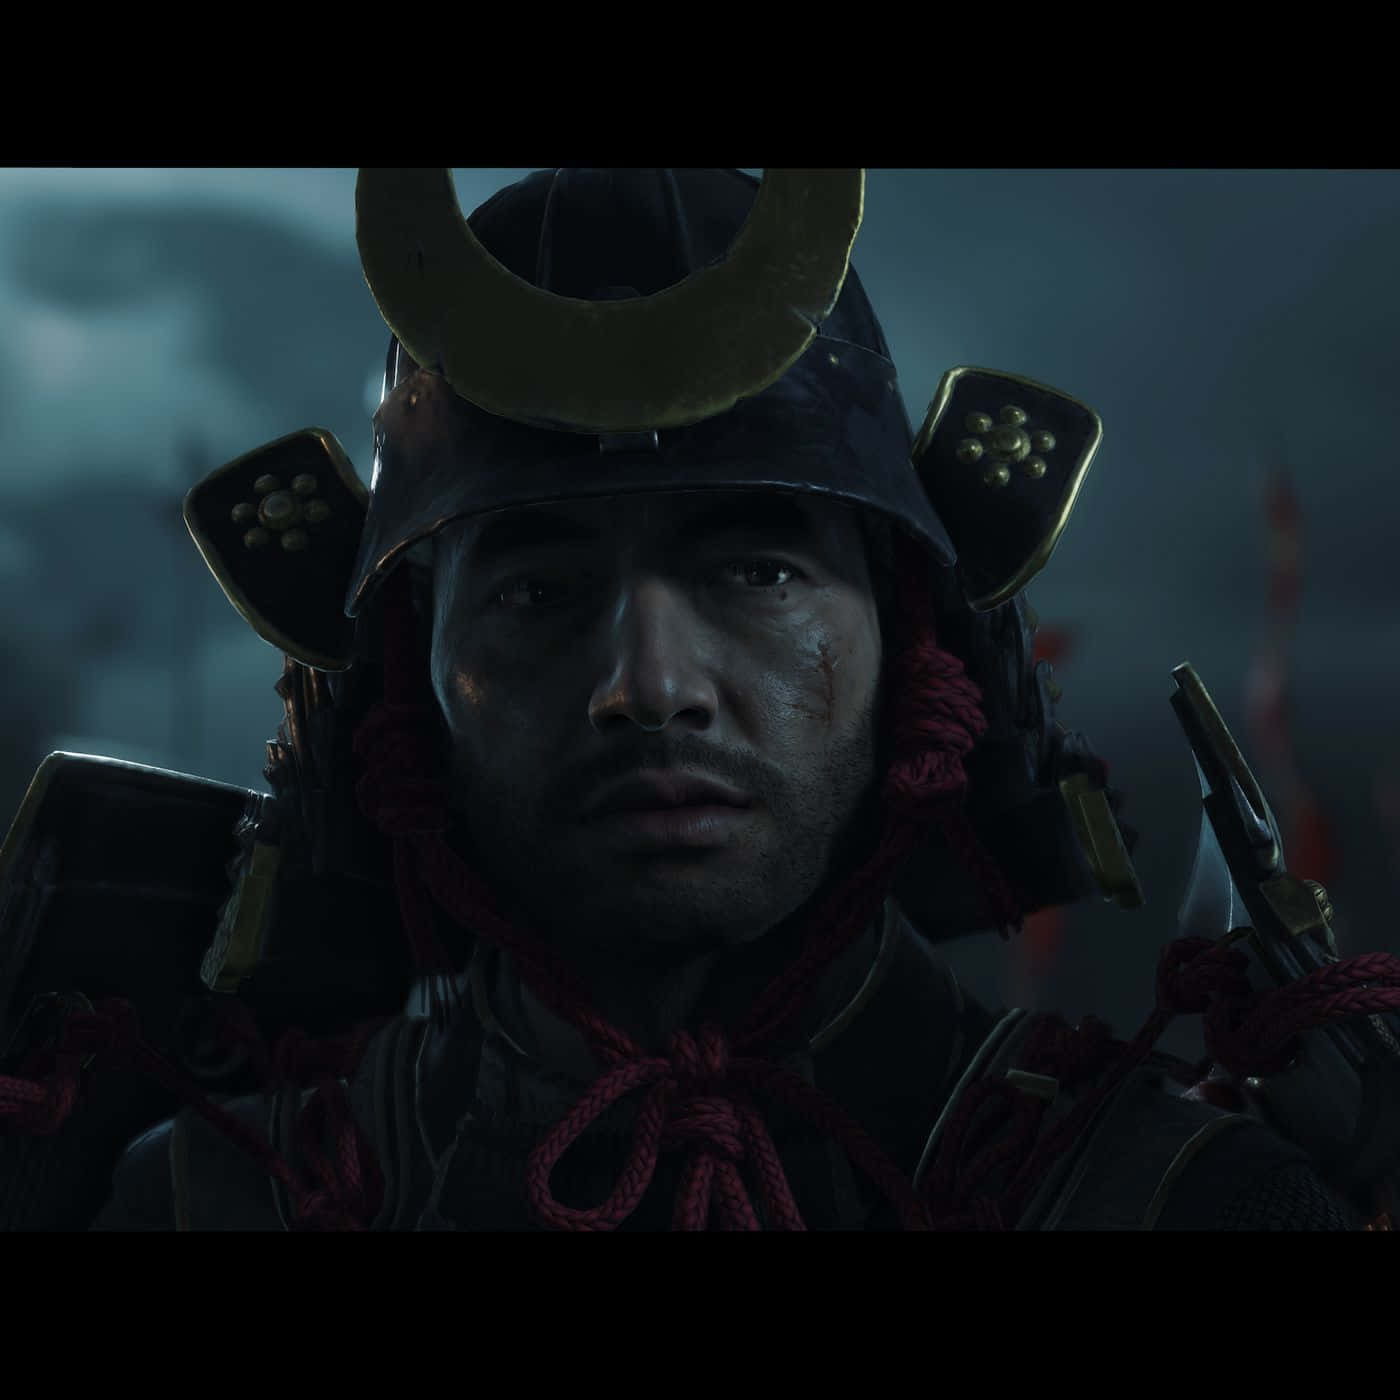 Exploring the world of Ghost of Tsushima